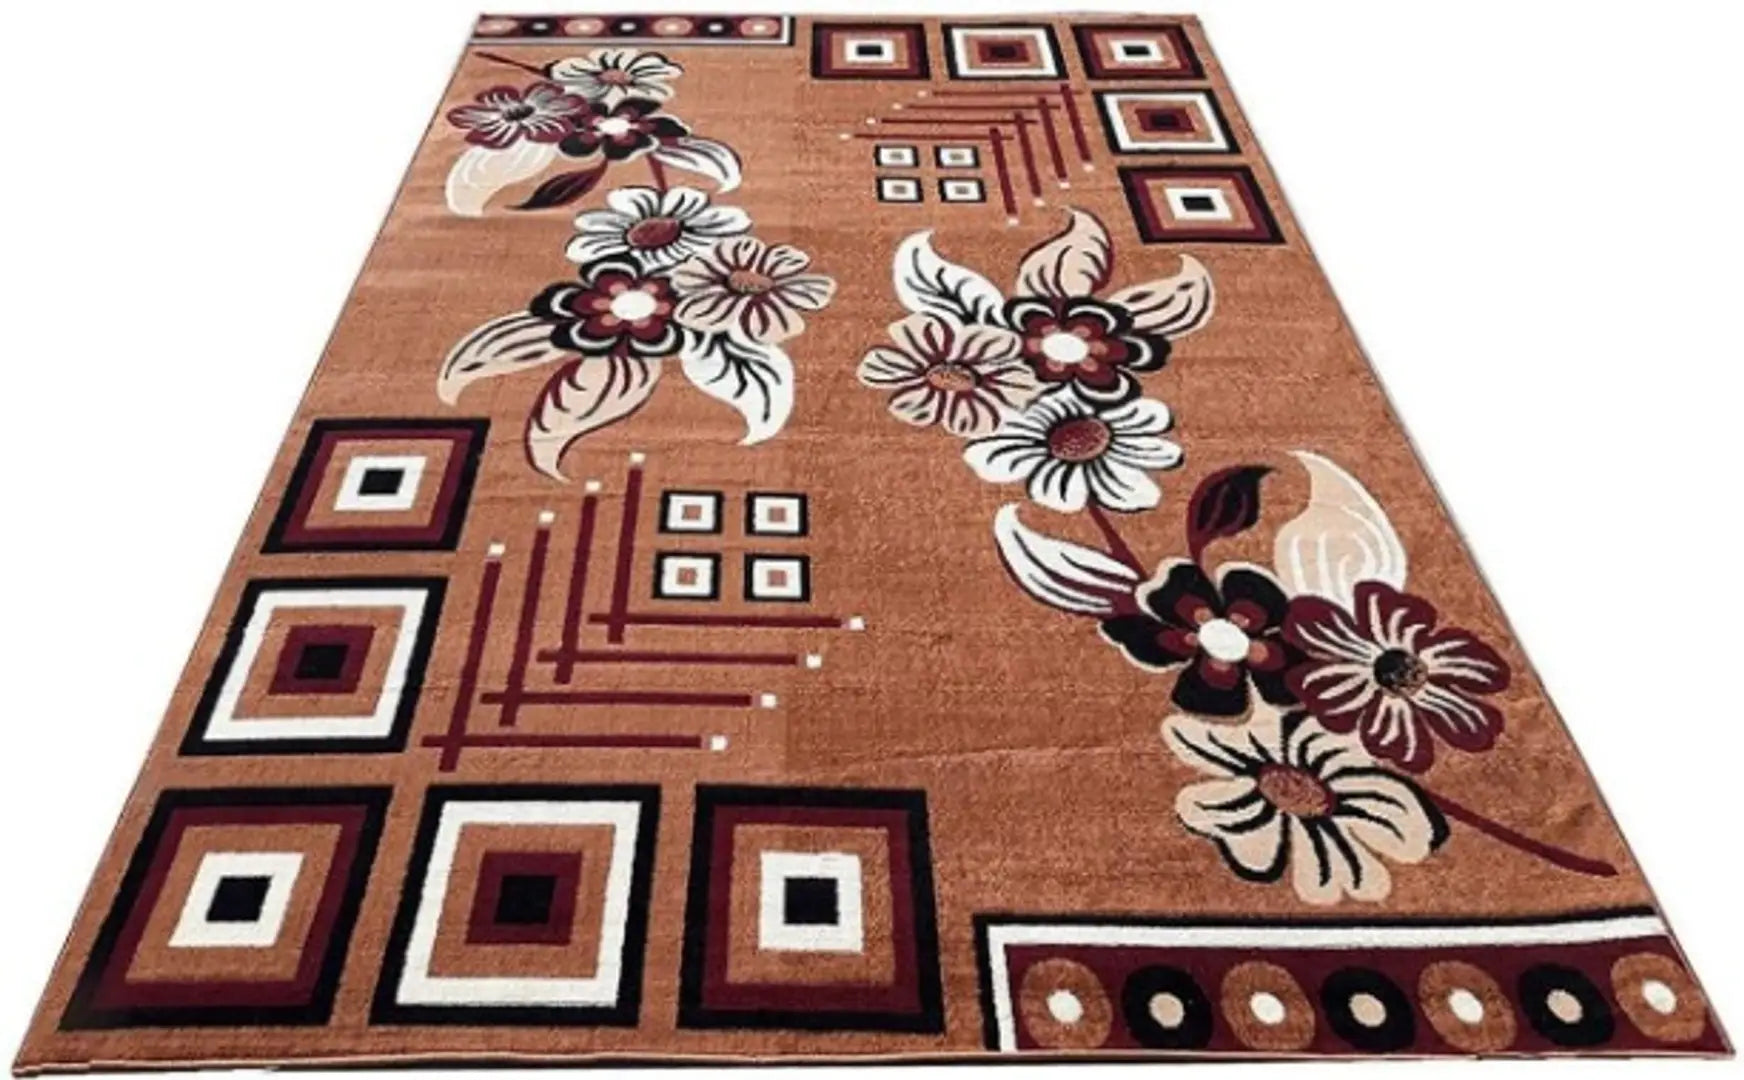 SUPER CARPETS PREMIUM QUALITY LIGHT WEIGHT CARPET WITH 5 TO 6 MM THICKNESS RUG